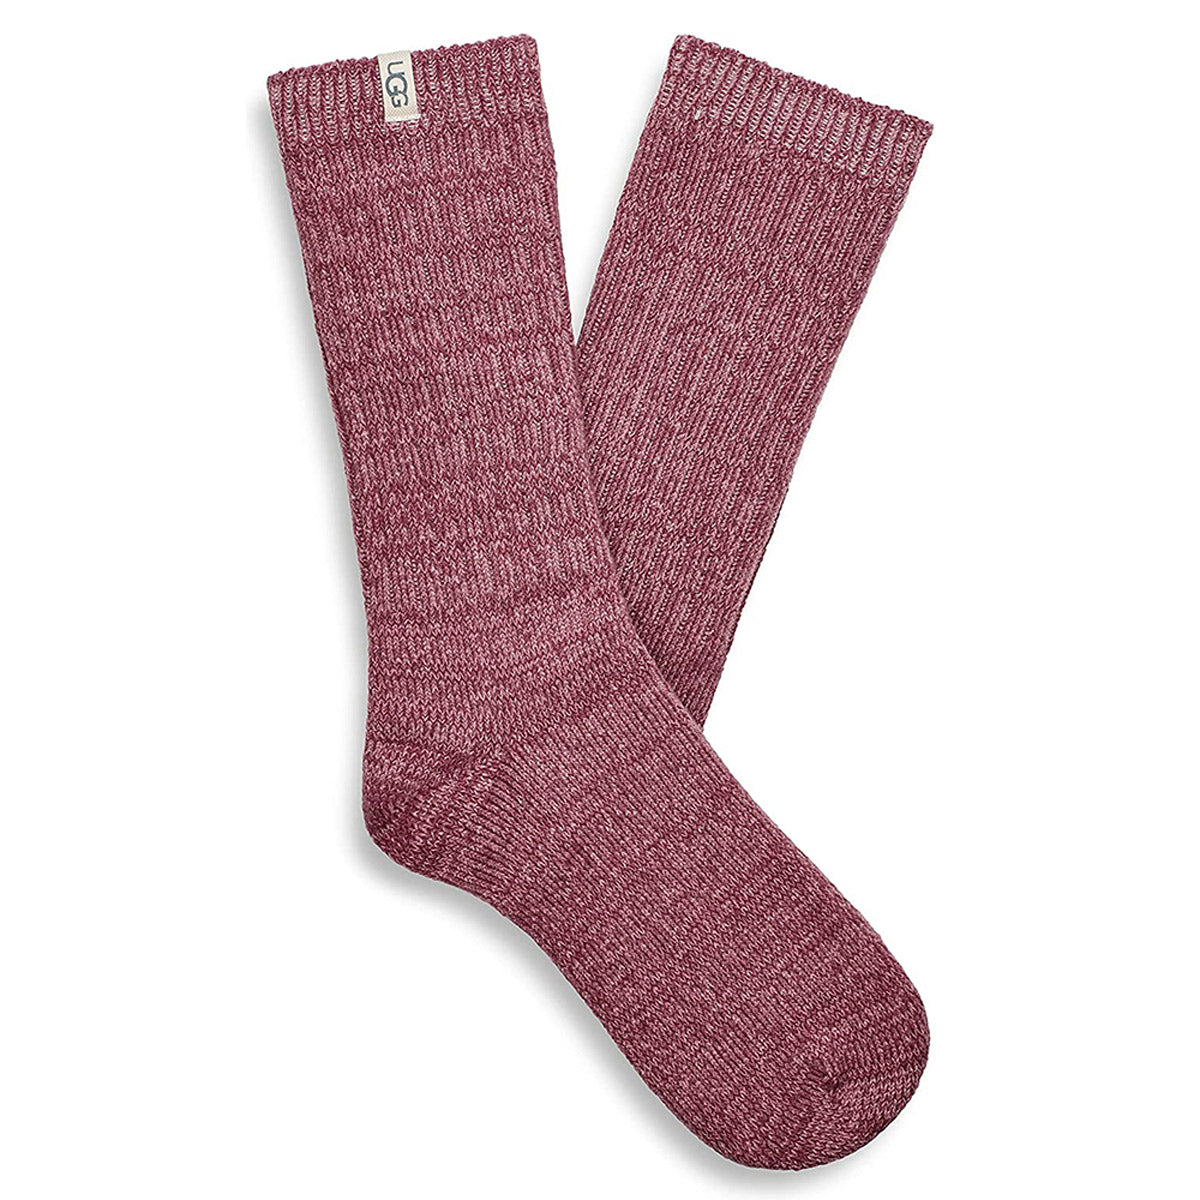 A pair of maroon Ugg UGG RIB KNIT SLOUCHY SOCKS FOXGLOVE/SANGRIA - WOMENS, each featuring a small tag with the brand name &quot;Ugg&quot; near the top hem.